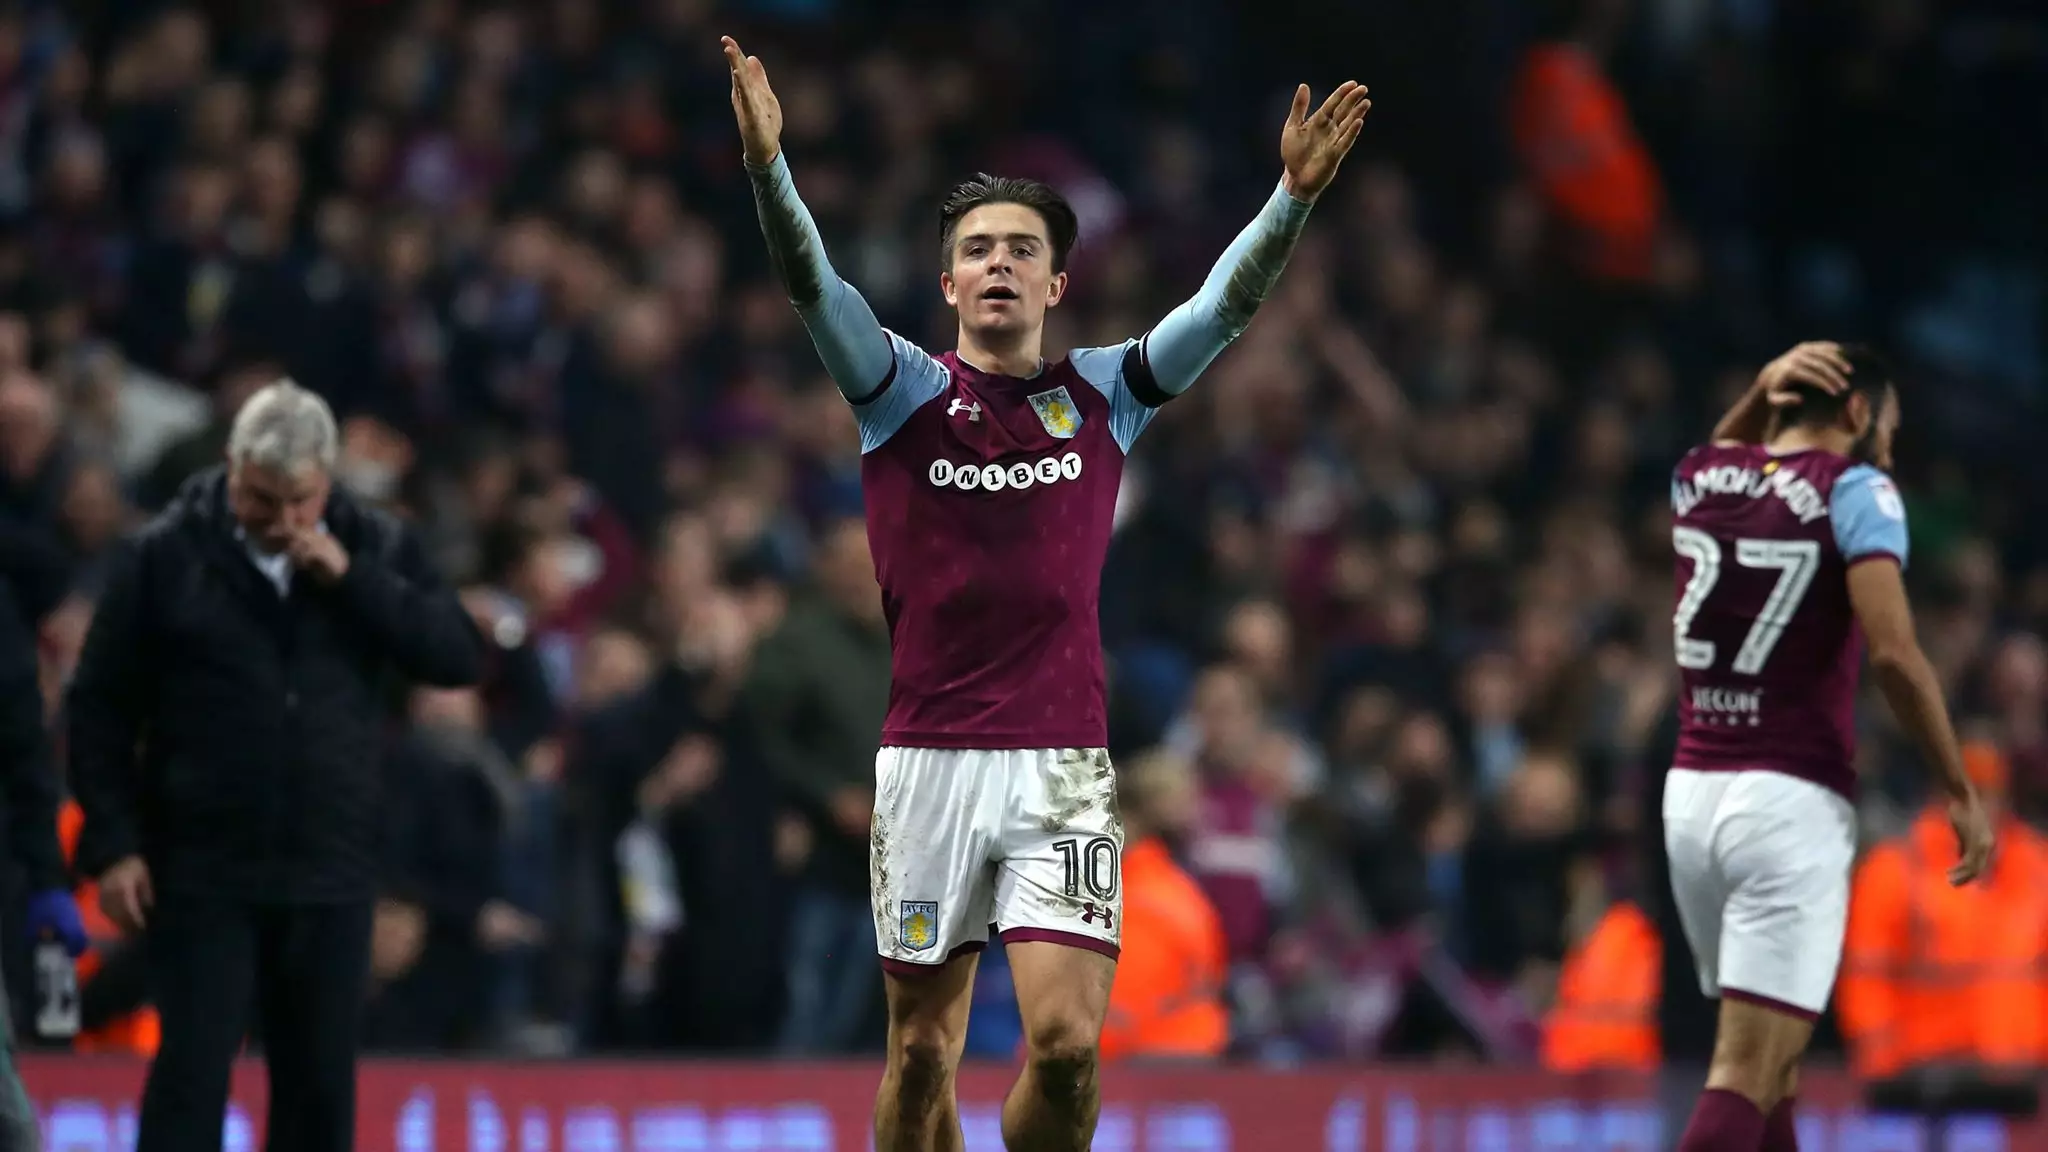 Grealish looks set for a return to the Premier League with Spurs. Image: PA Images